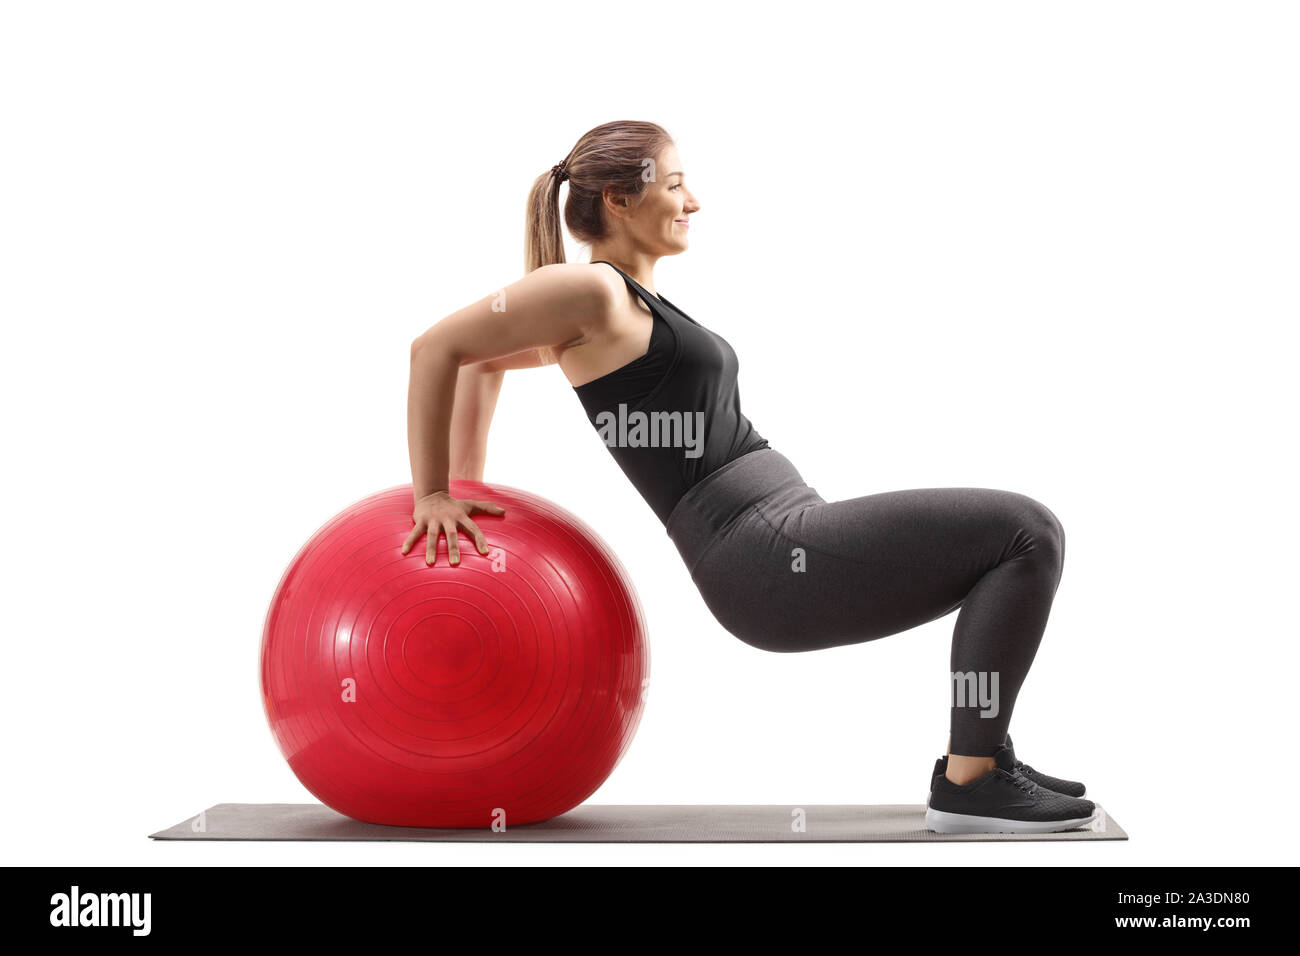 Aerobic challenge Cut Out Stock Images & Pictures - Alamy